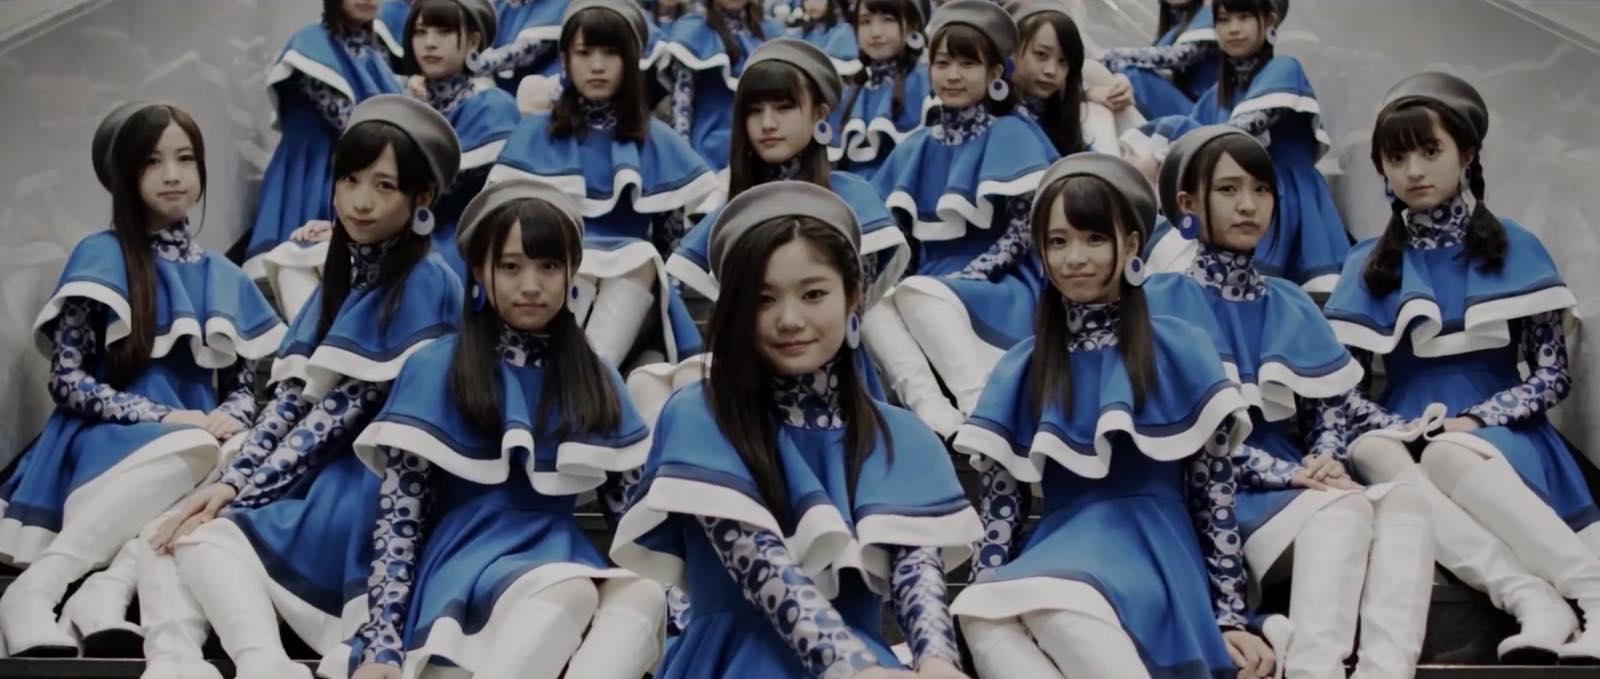 Team 8 World Order! AKB48’s Magnificent 47 March Forward in the MV for “Amanojaku Batta”!